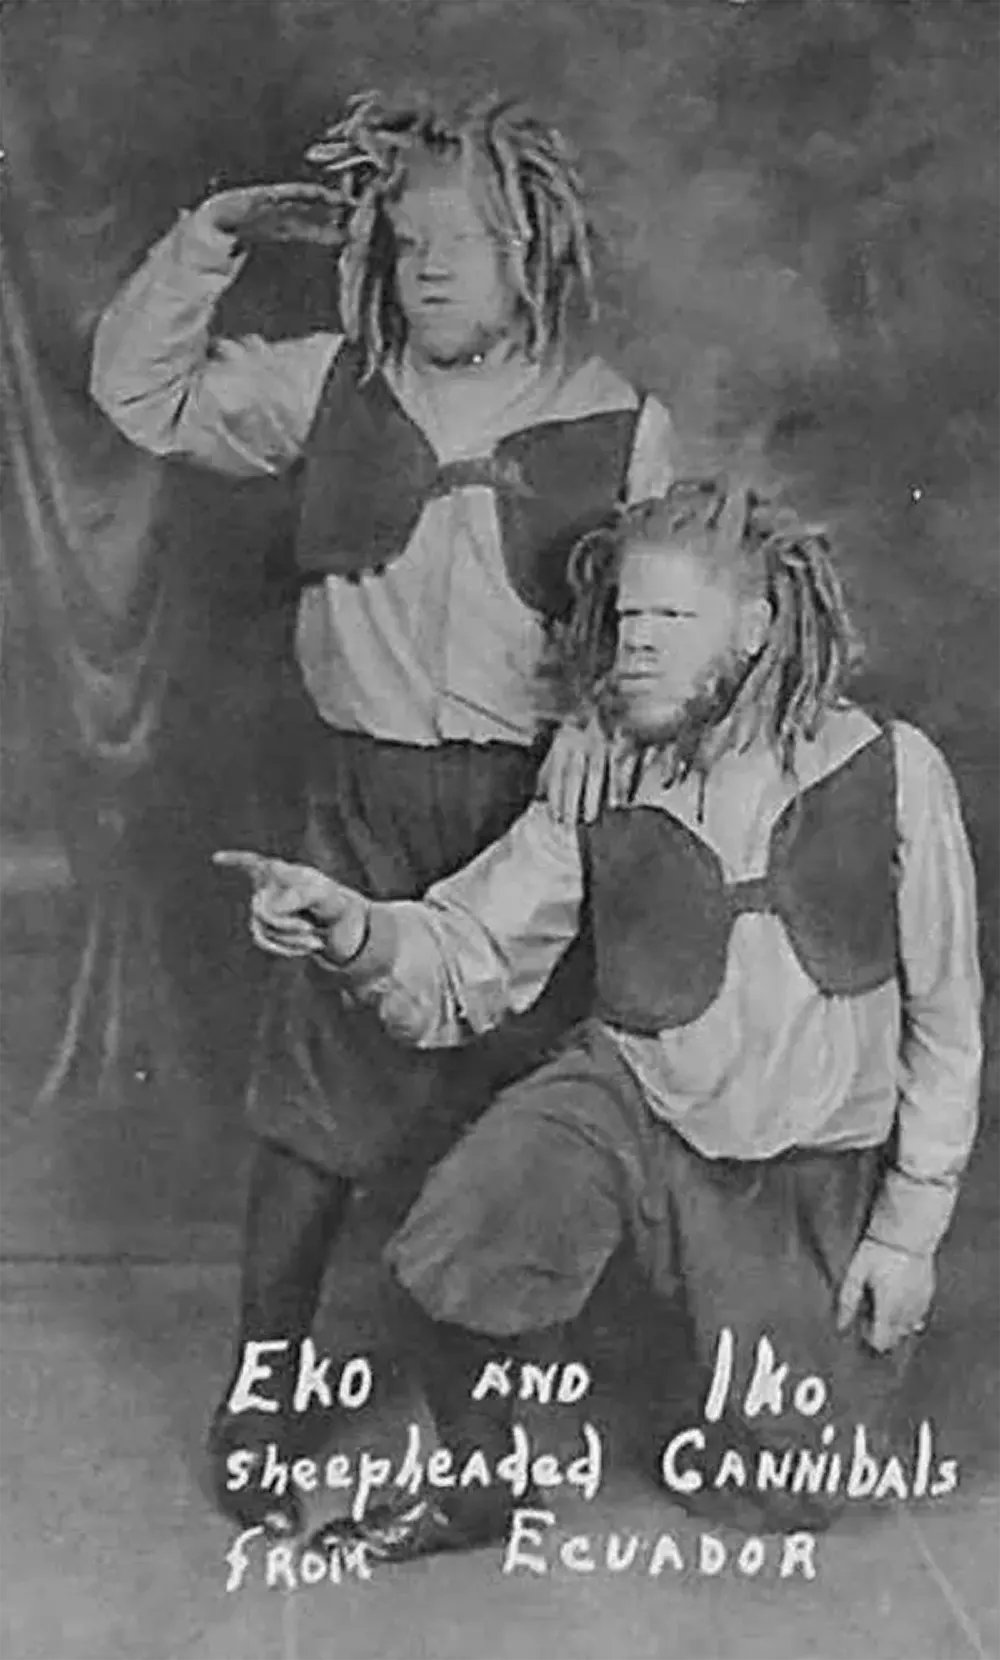 The brothers shown as Eko and Iko, sheepheaded cannibals from Ecuador.